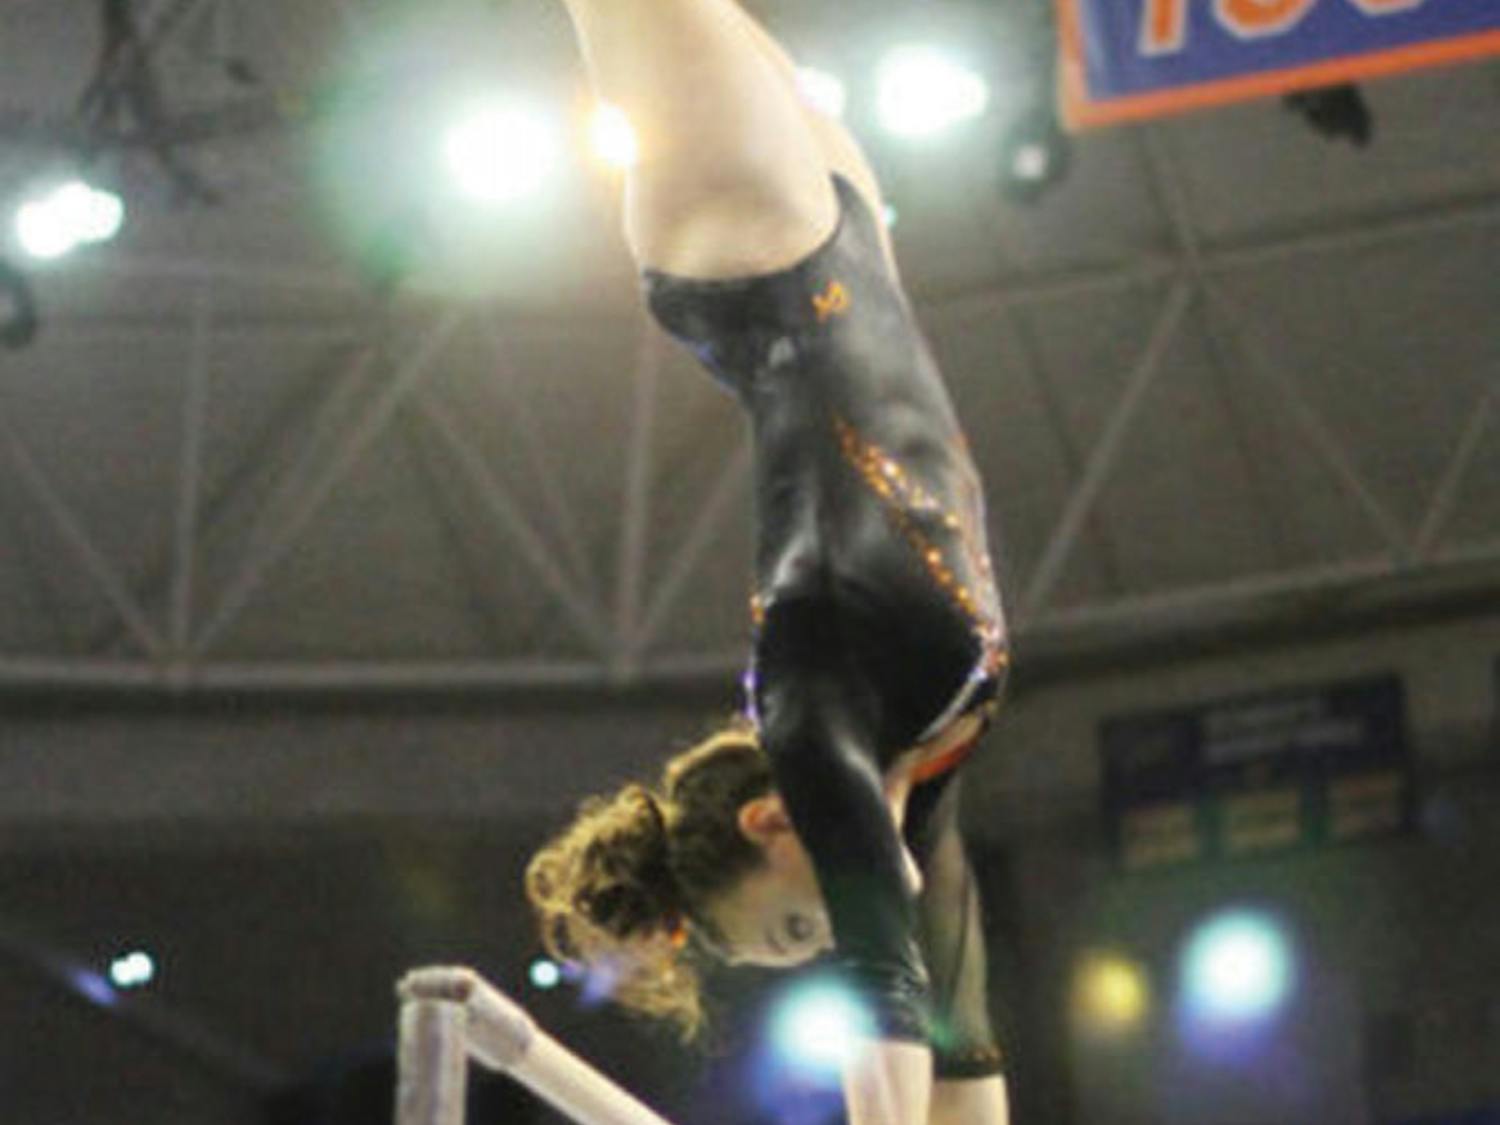 Kiersten Wang performs on the uneven bars during Florida’s win against Kentucky on Feb 22, 2013.